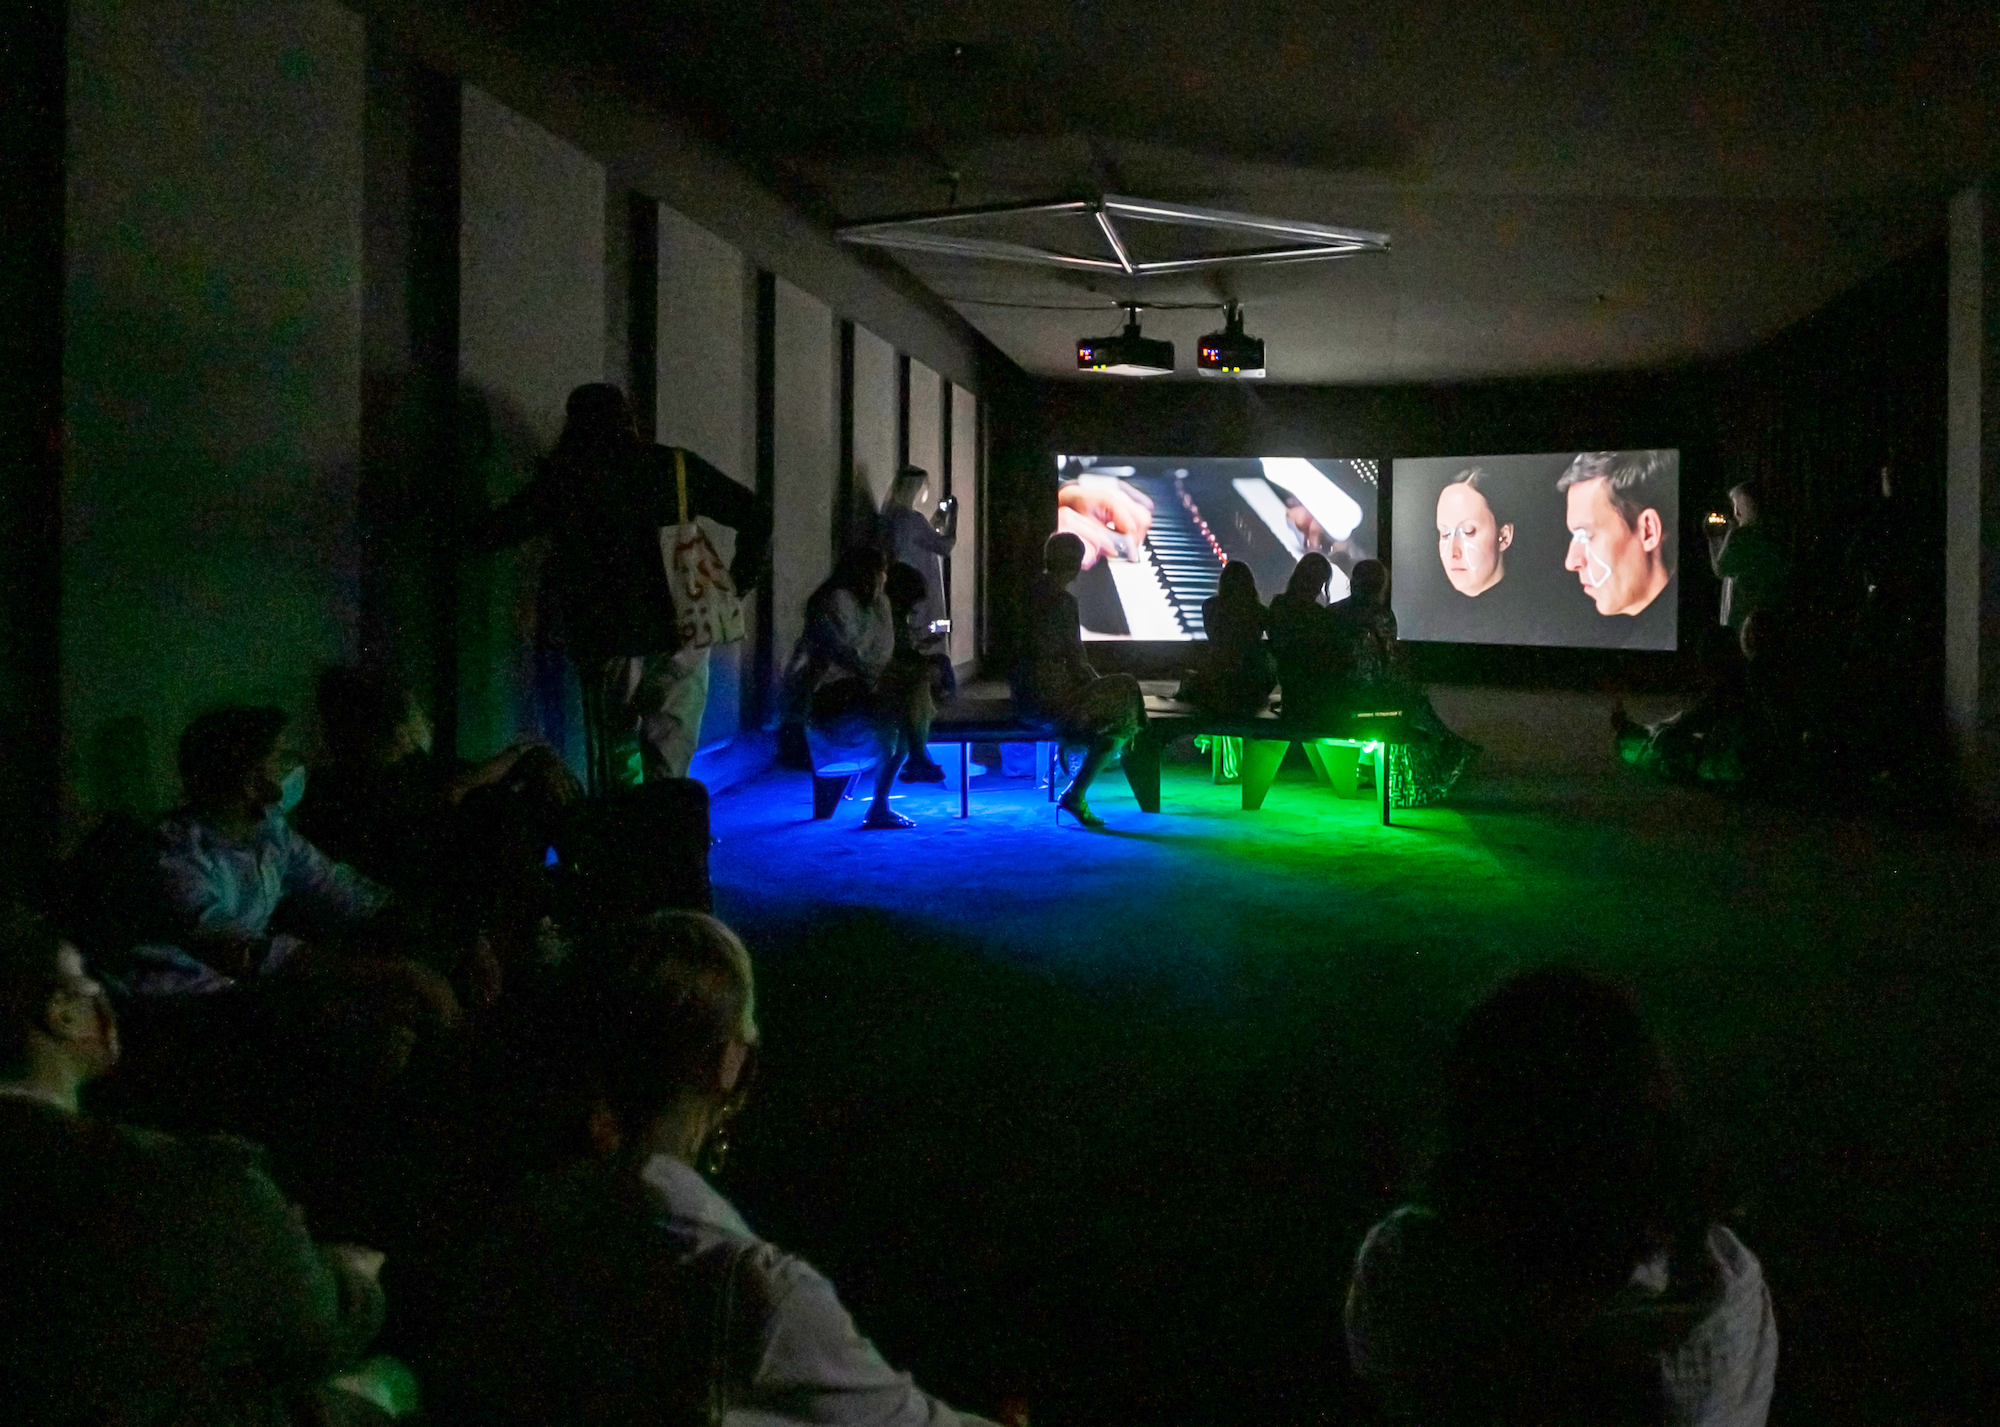 A group of people sitting around a dark room, focused on two large screens featuring piano players and hands on the keys are projected in the background.